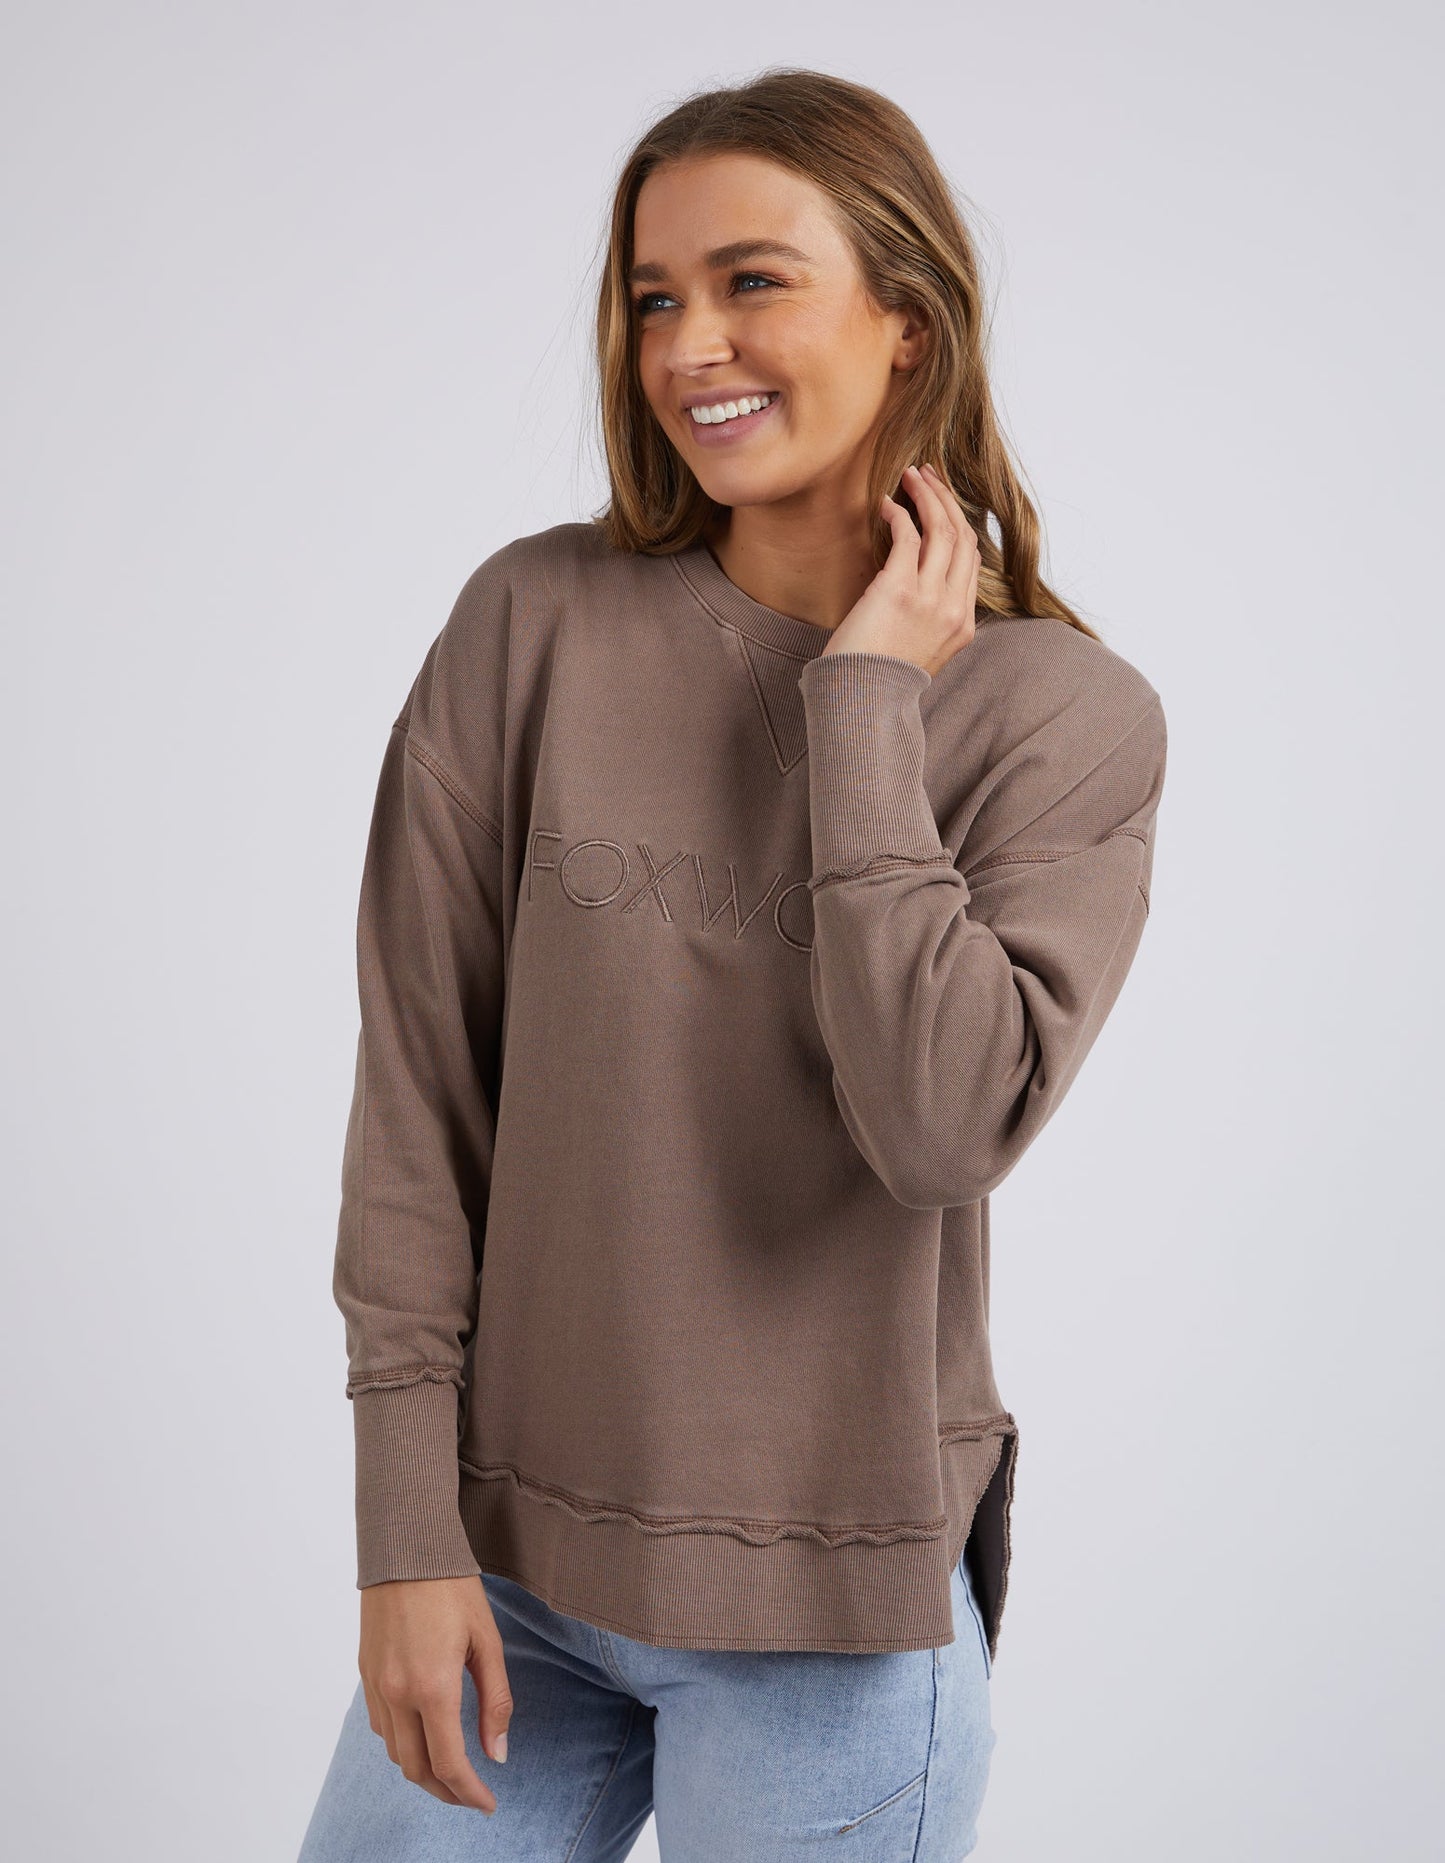 FOXWOOD SIMPLIFIED CREW - CHOCOLATE BROWN - THE VOGUE STORE